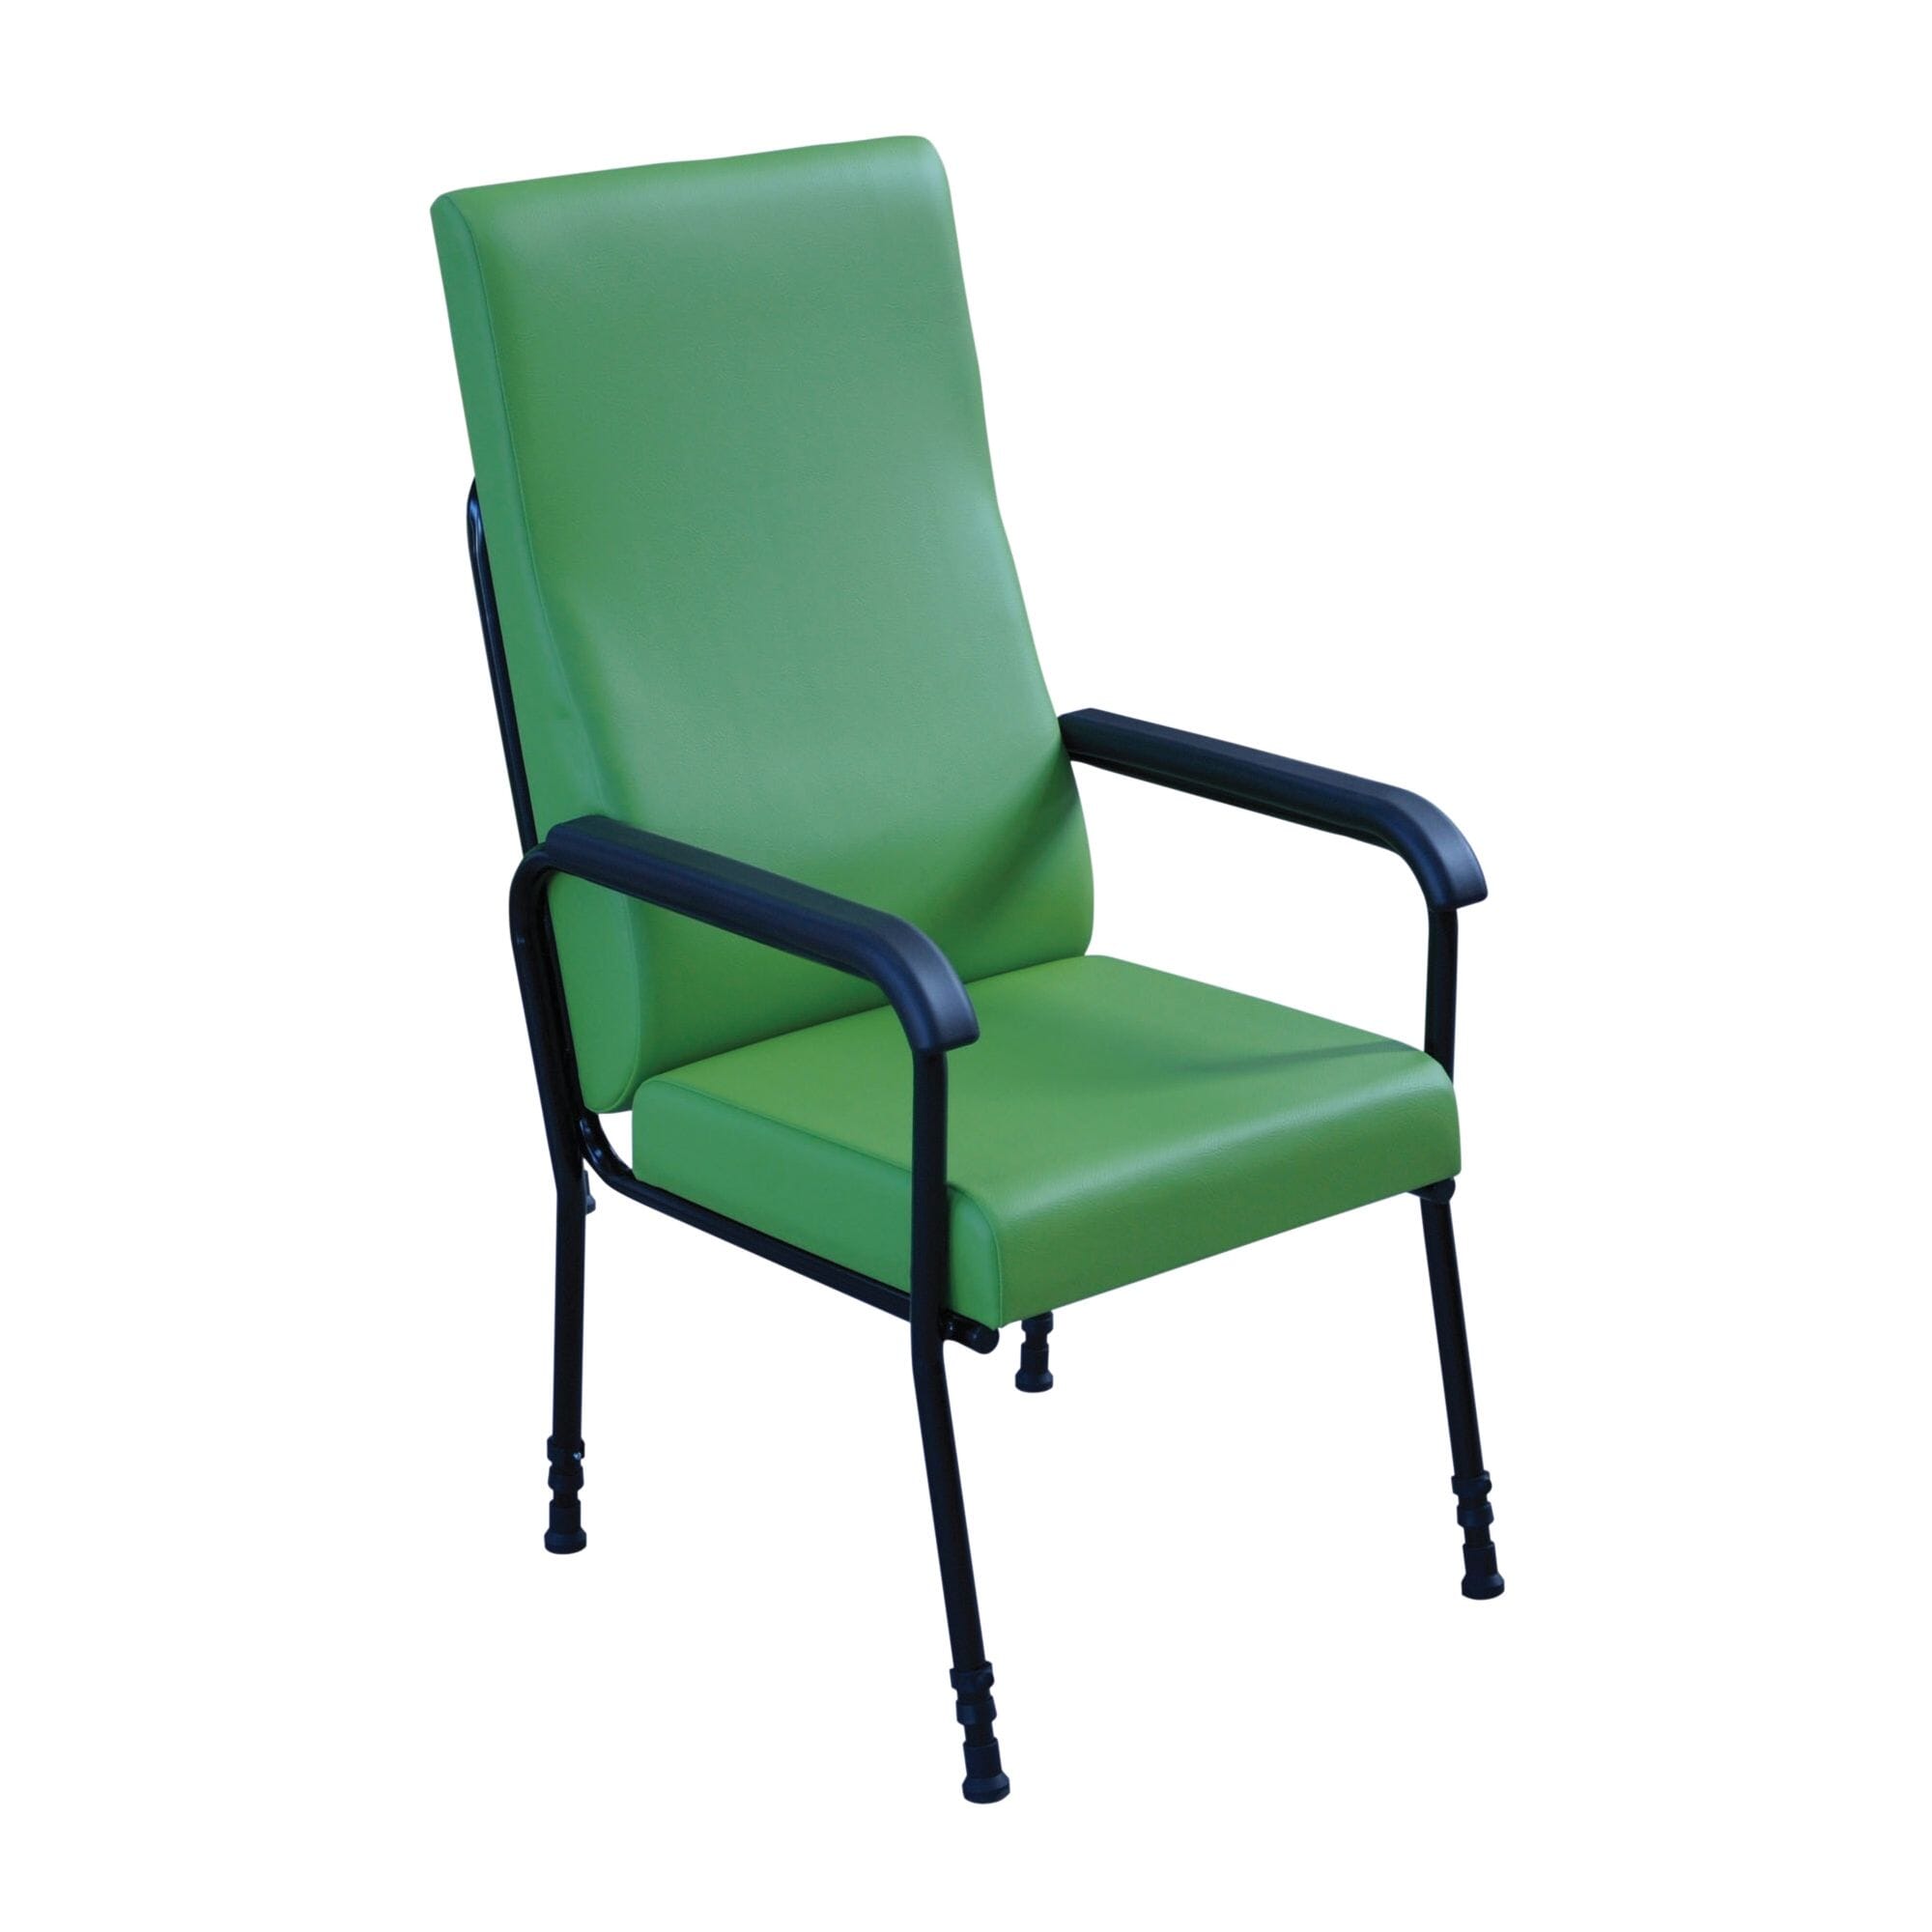 View Longfield Lounge Chair Green information